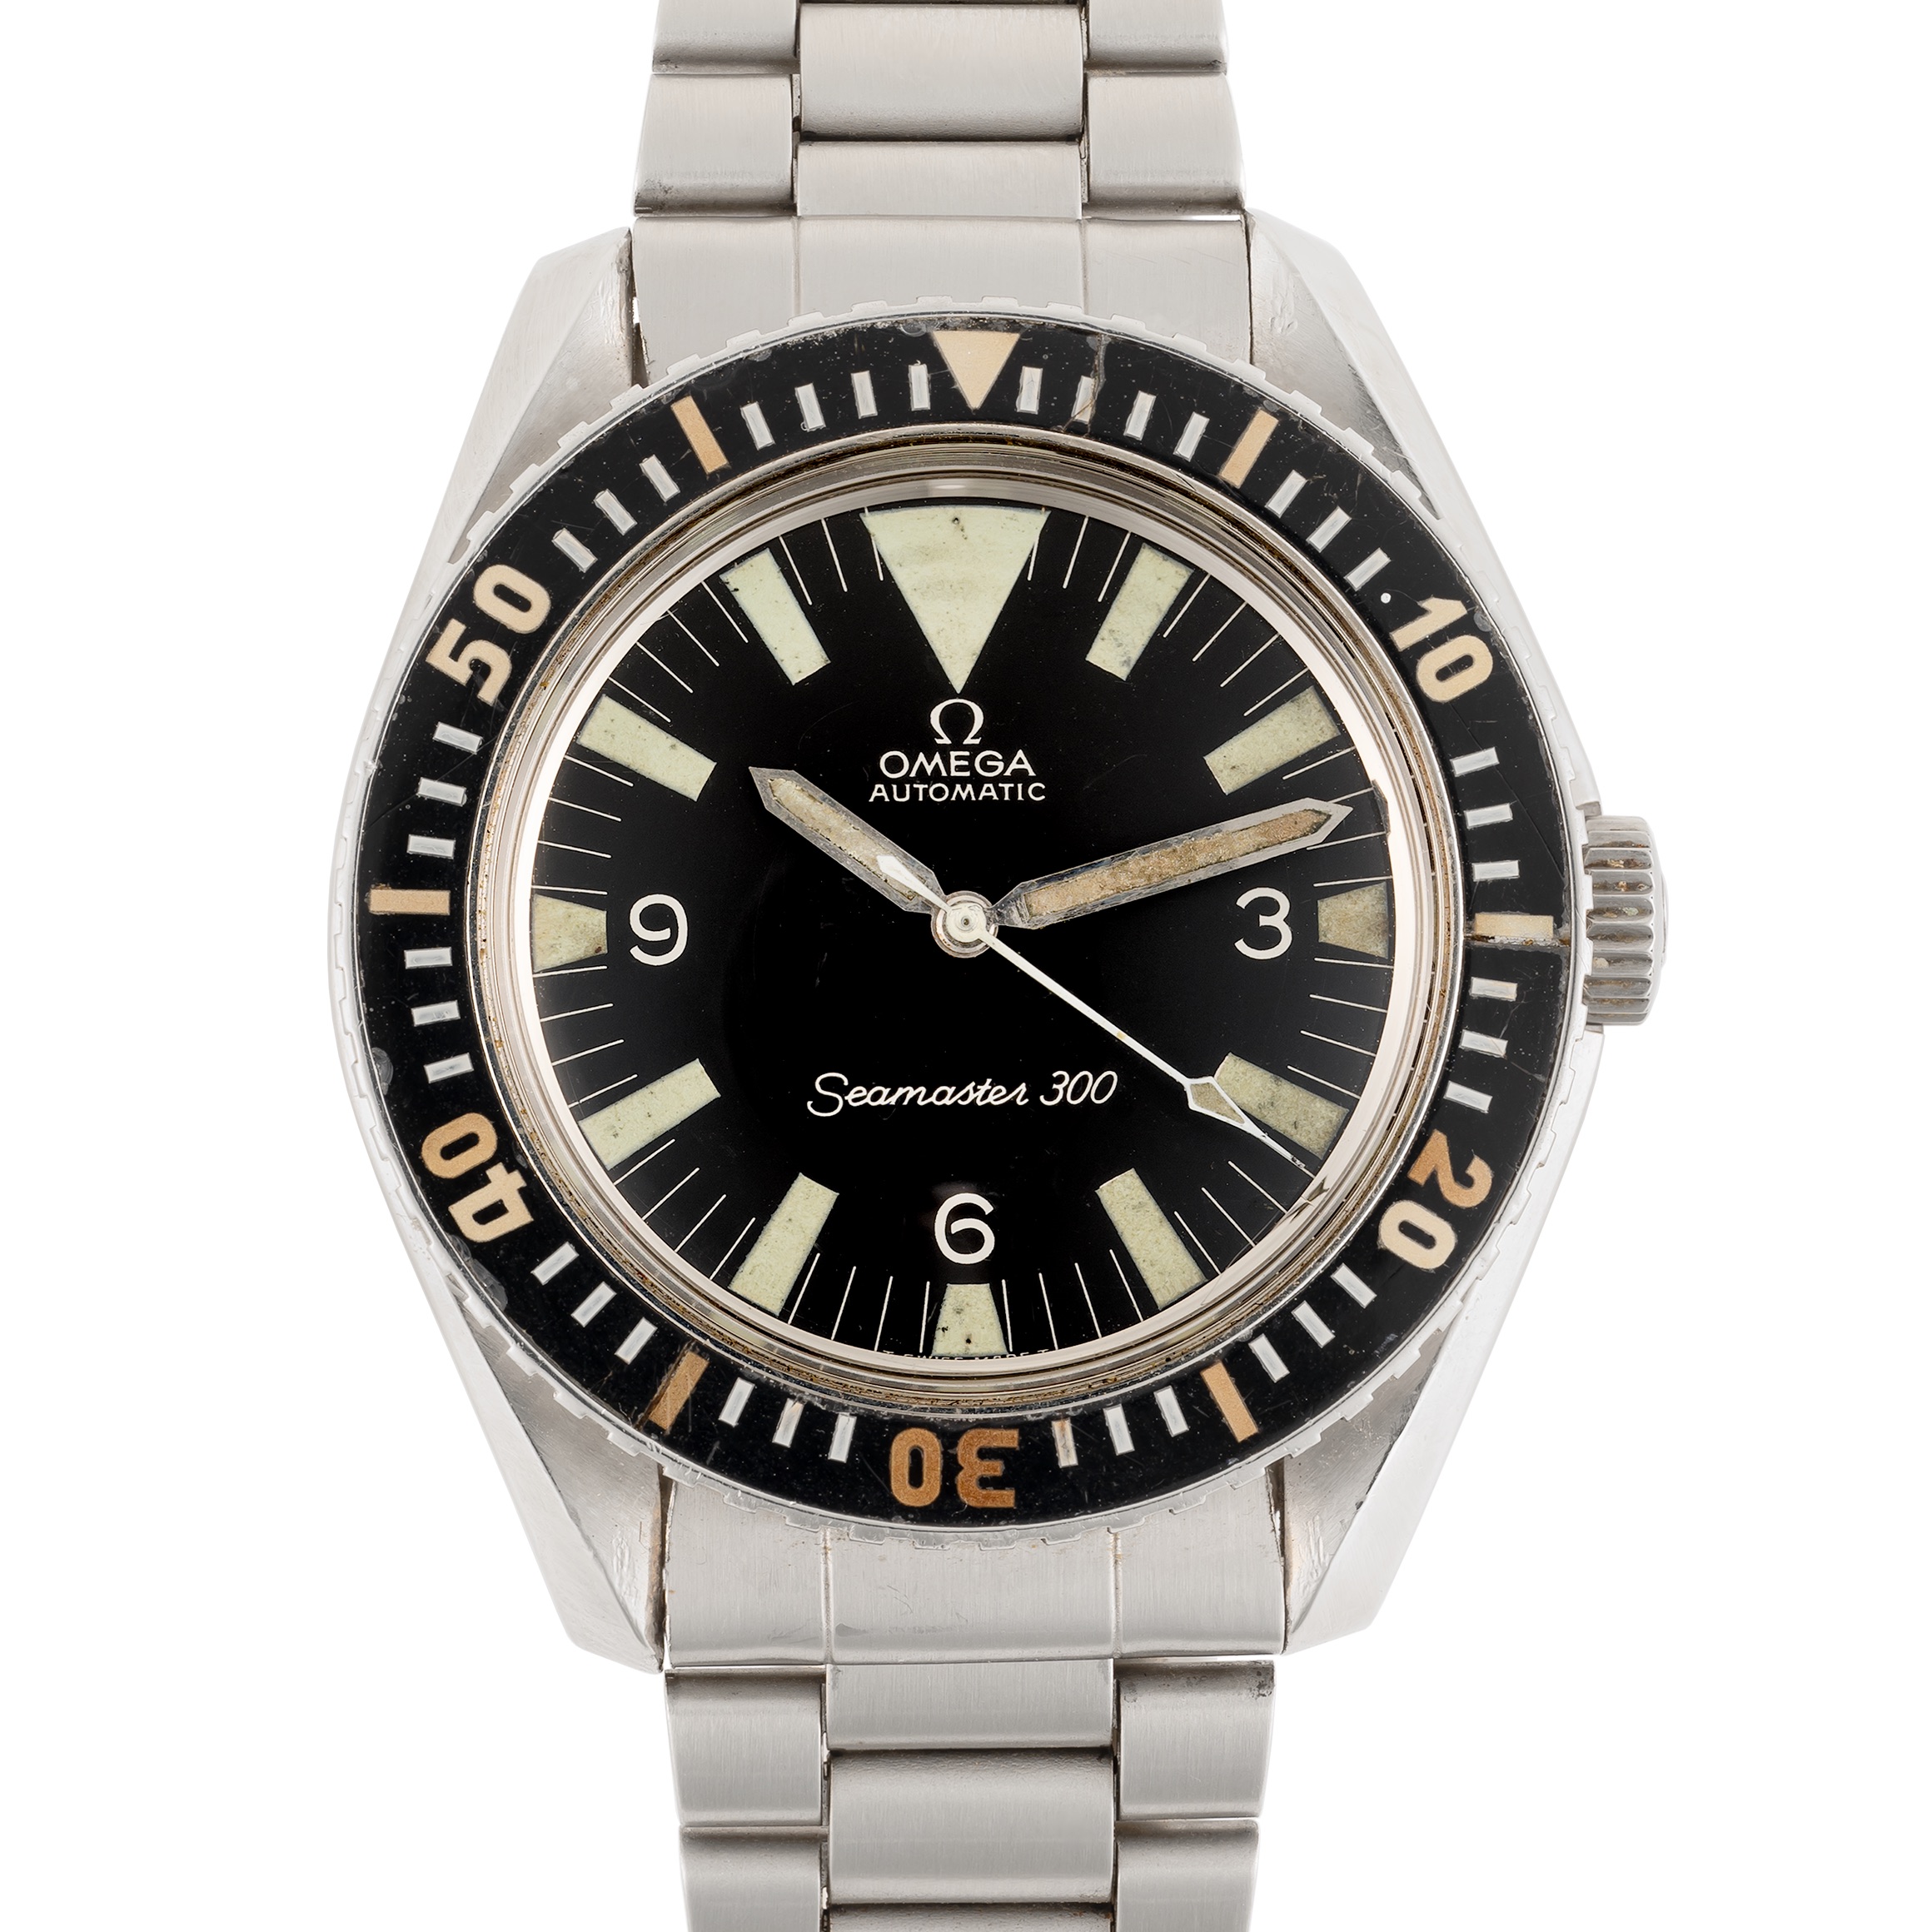 A GENTLEMAN'S SIZE STAINLESS STEEL OMEGA SEAMASTER 300 DIVERS BRACELET WATCH CIRCA 1965, REF. 165. - Image 3 of 10